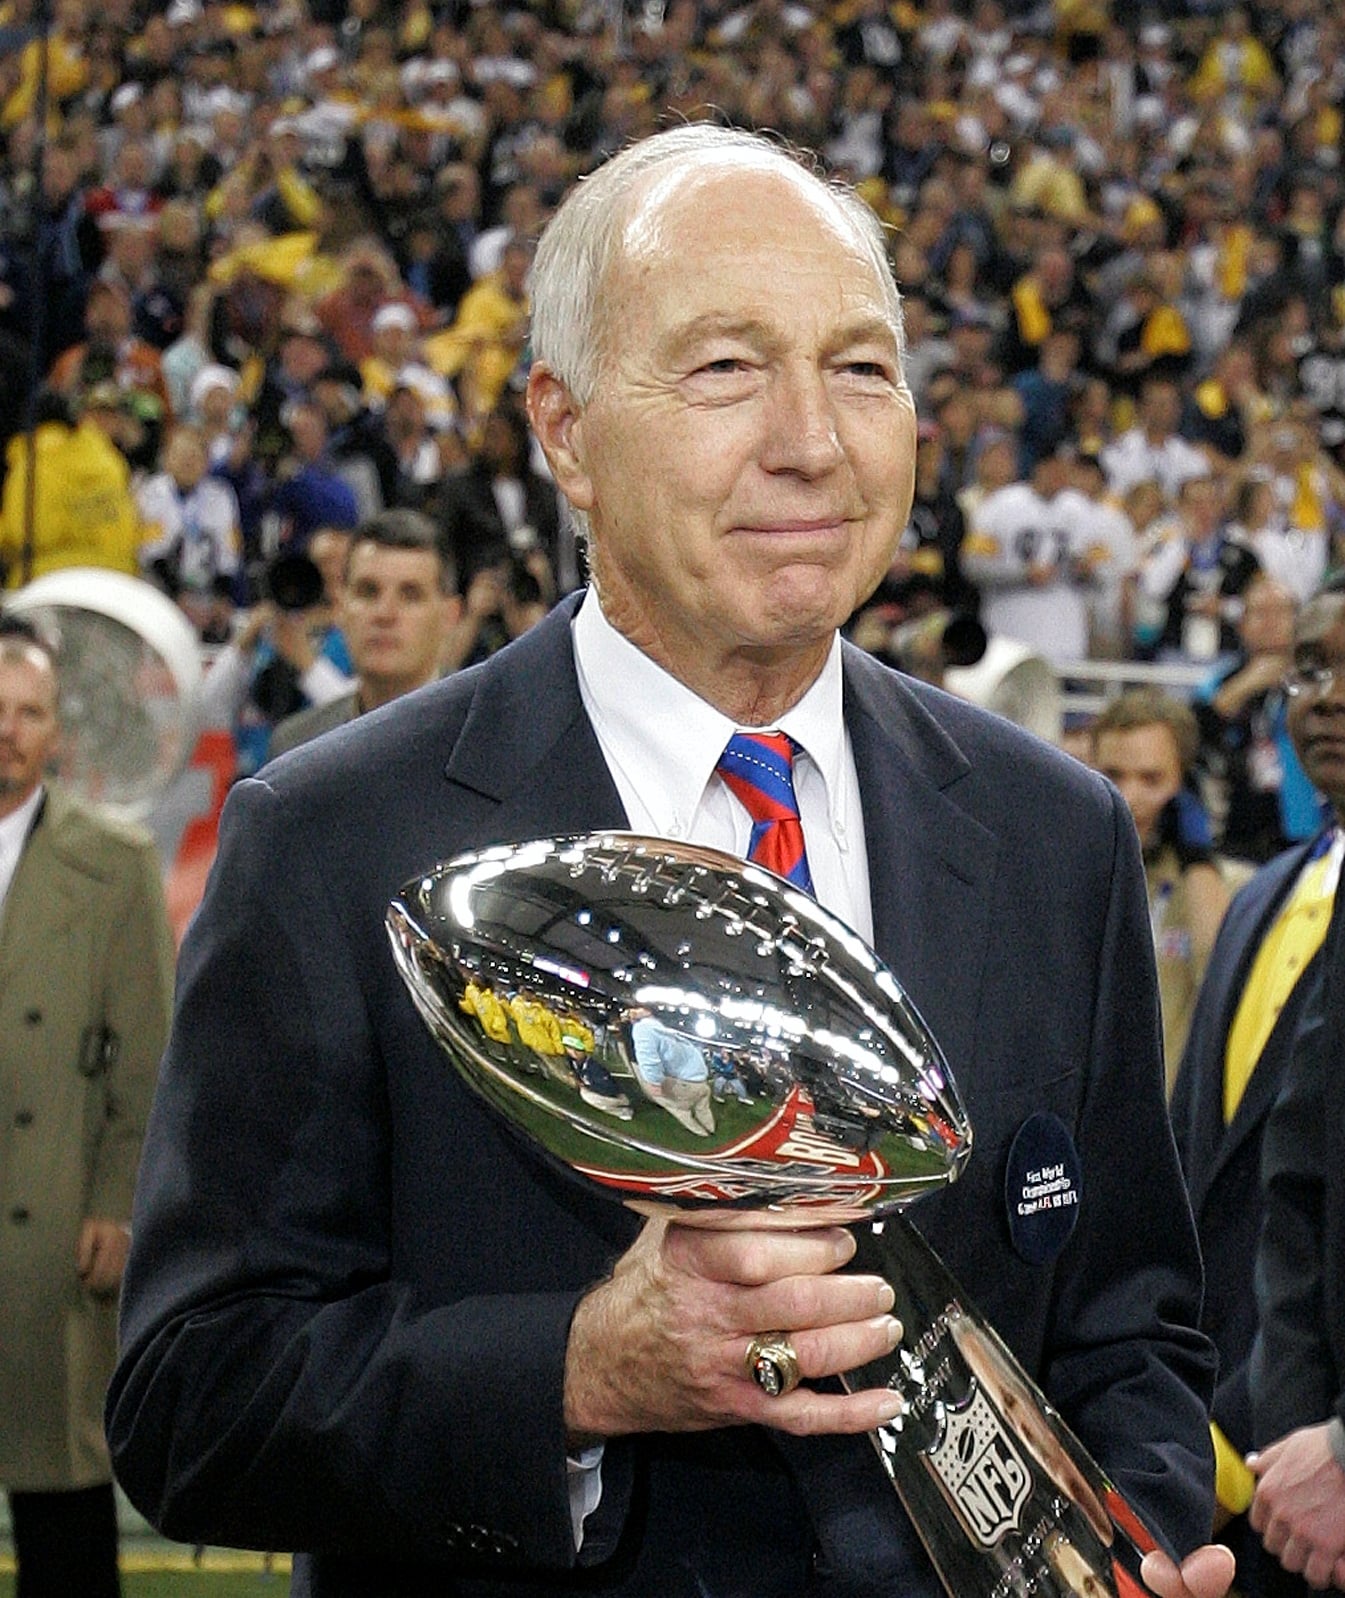 Green Bay Packers' Bart Starr with in the Vince Lombardi Trophy in 2002.  Starr, the Green Bay Packers quarterback and catalyst of Lombardi's powerhouse teams of the 1960s, has died. He was 85. The Packers announced Sunday, May 26, 2019, that Starr had died, citing his family. He had been in failing health since suffering a serious stroke in 2014.